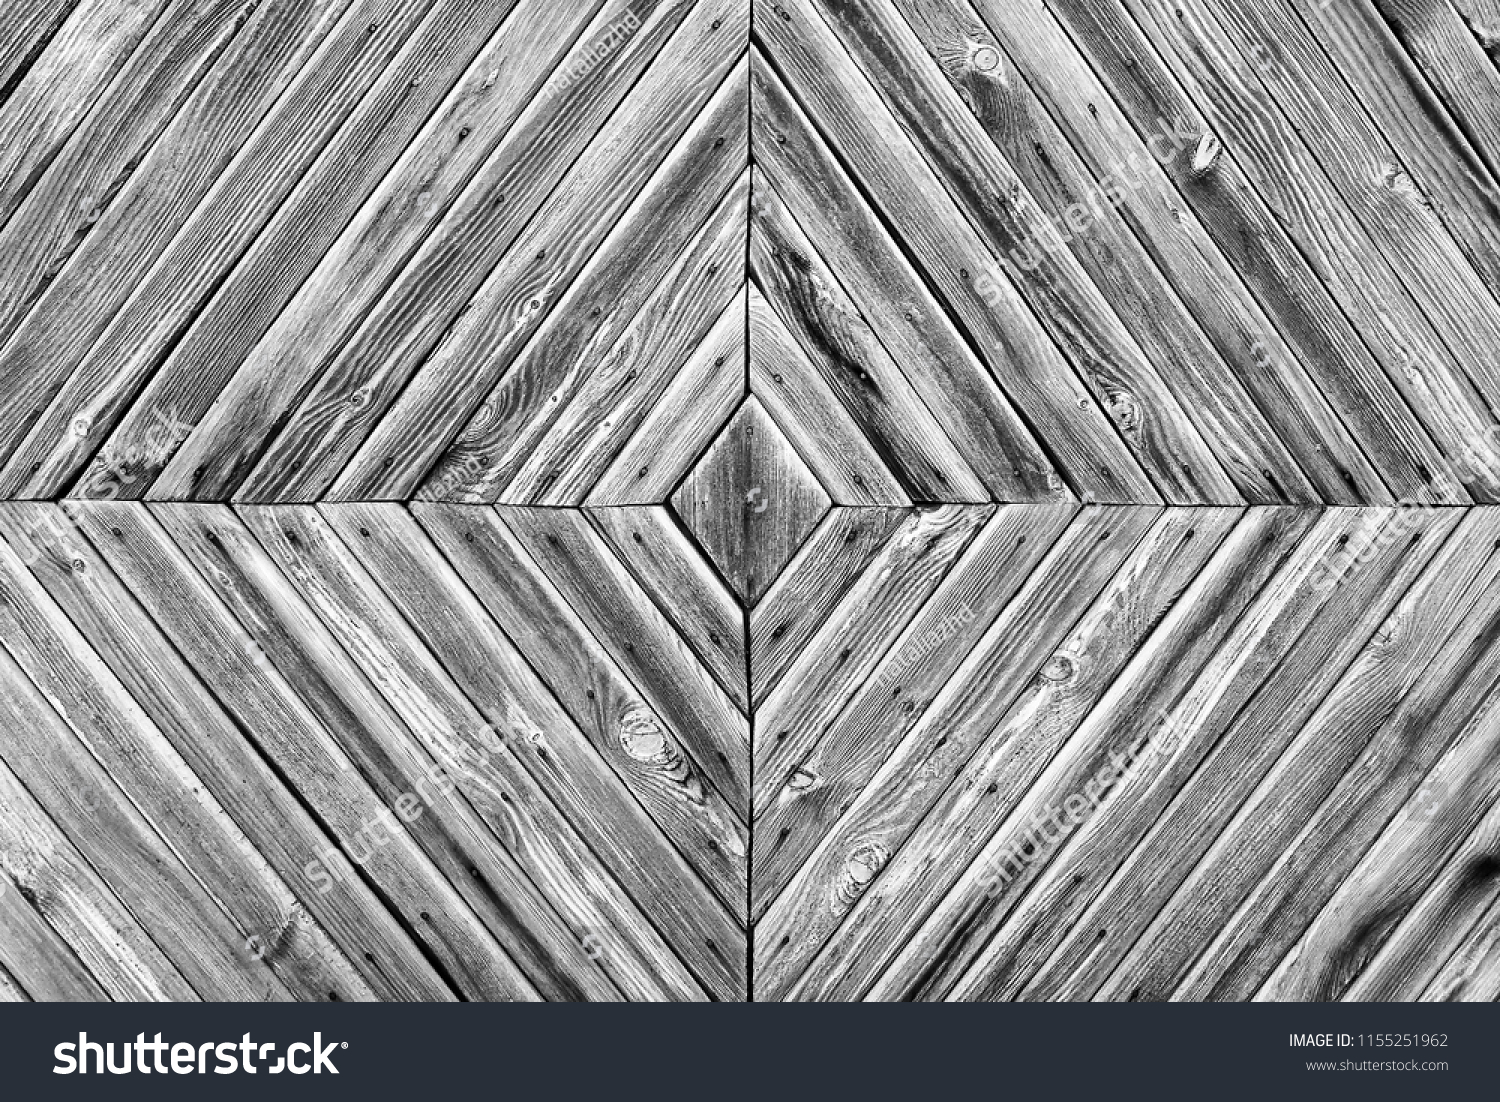 A diamond-shaped pattern of the old wooden boards,black and wite background #1155251962